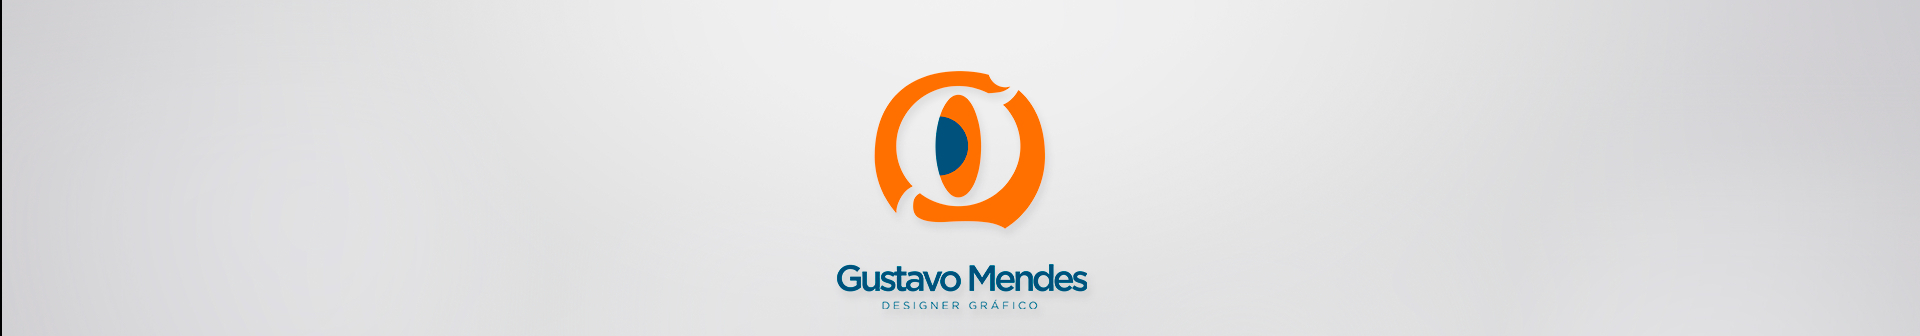 Gustavo Mendes's profile banner